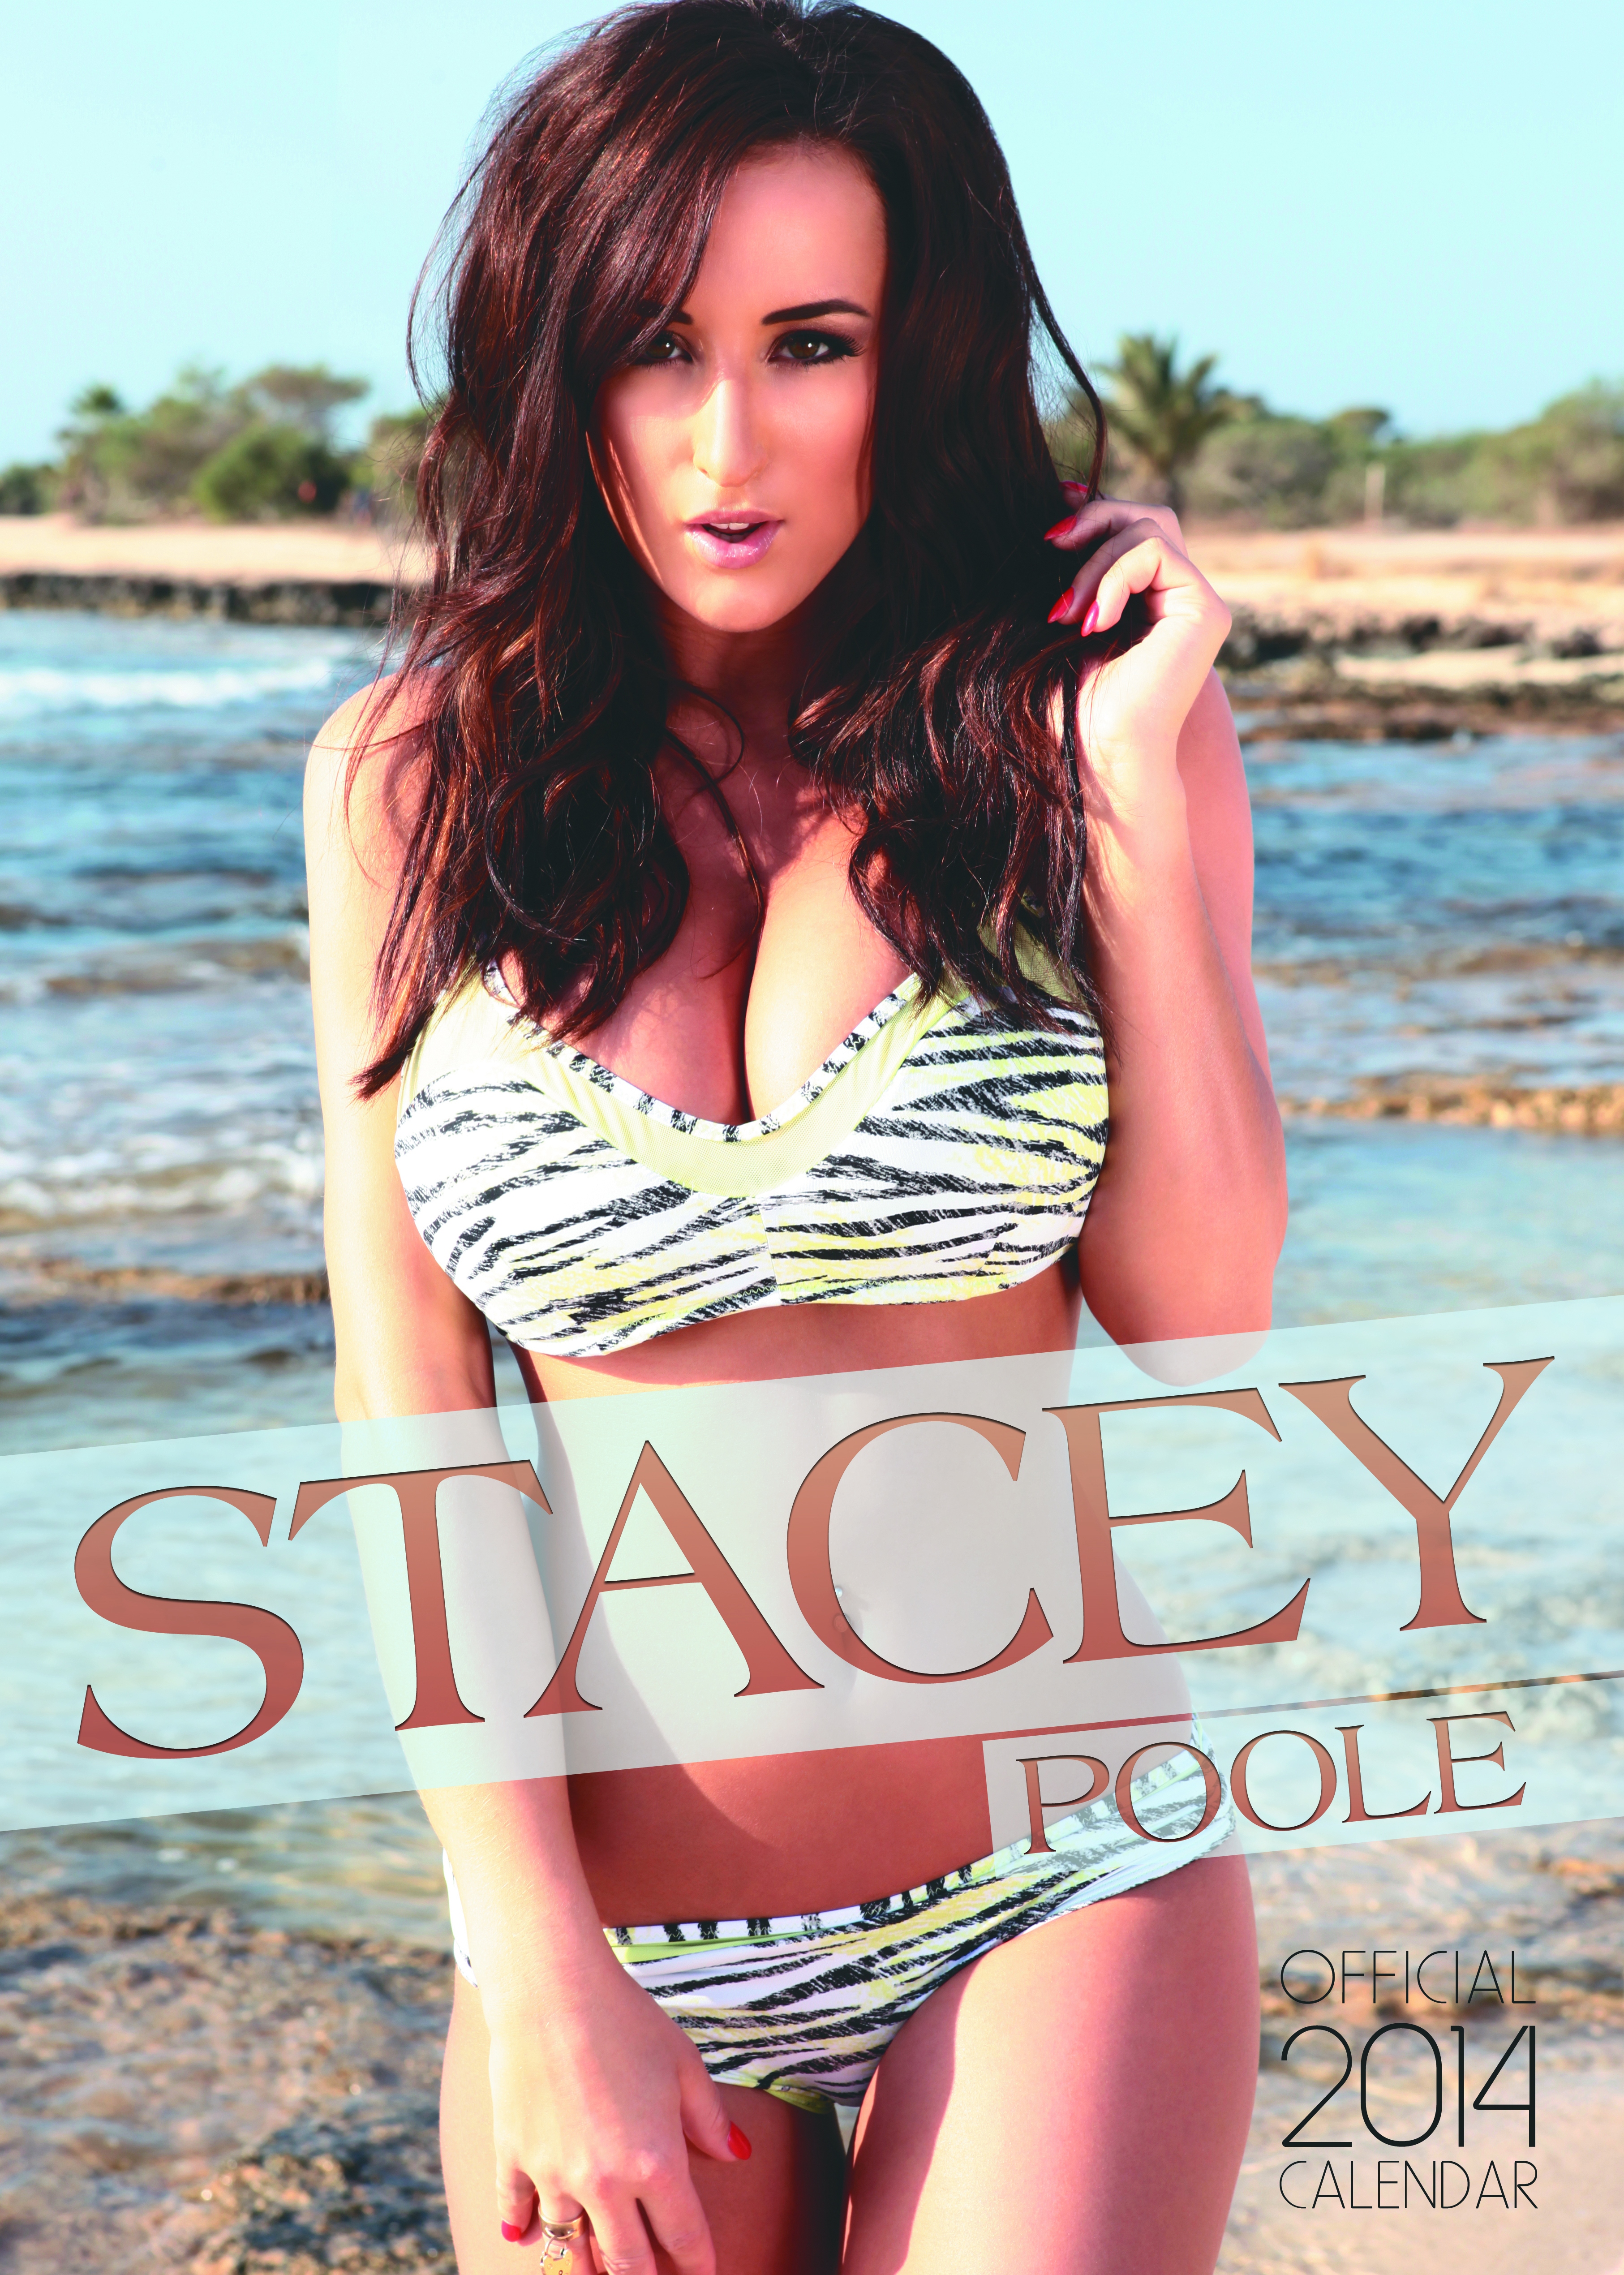 Stacey Poole very awesome 2014 Calendar Shoot